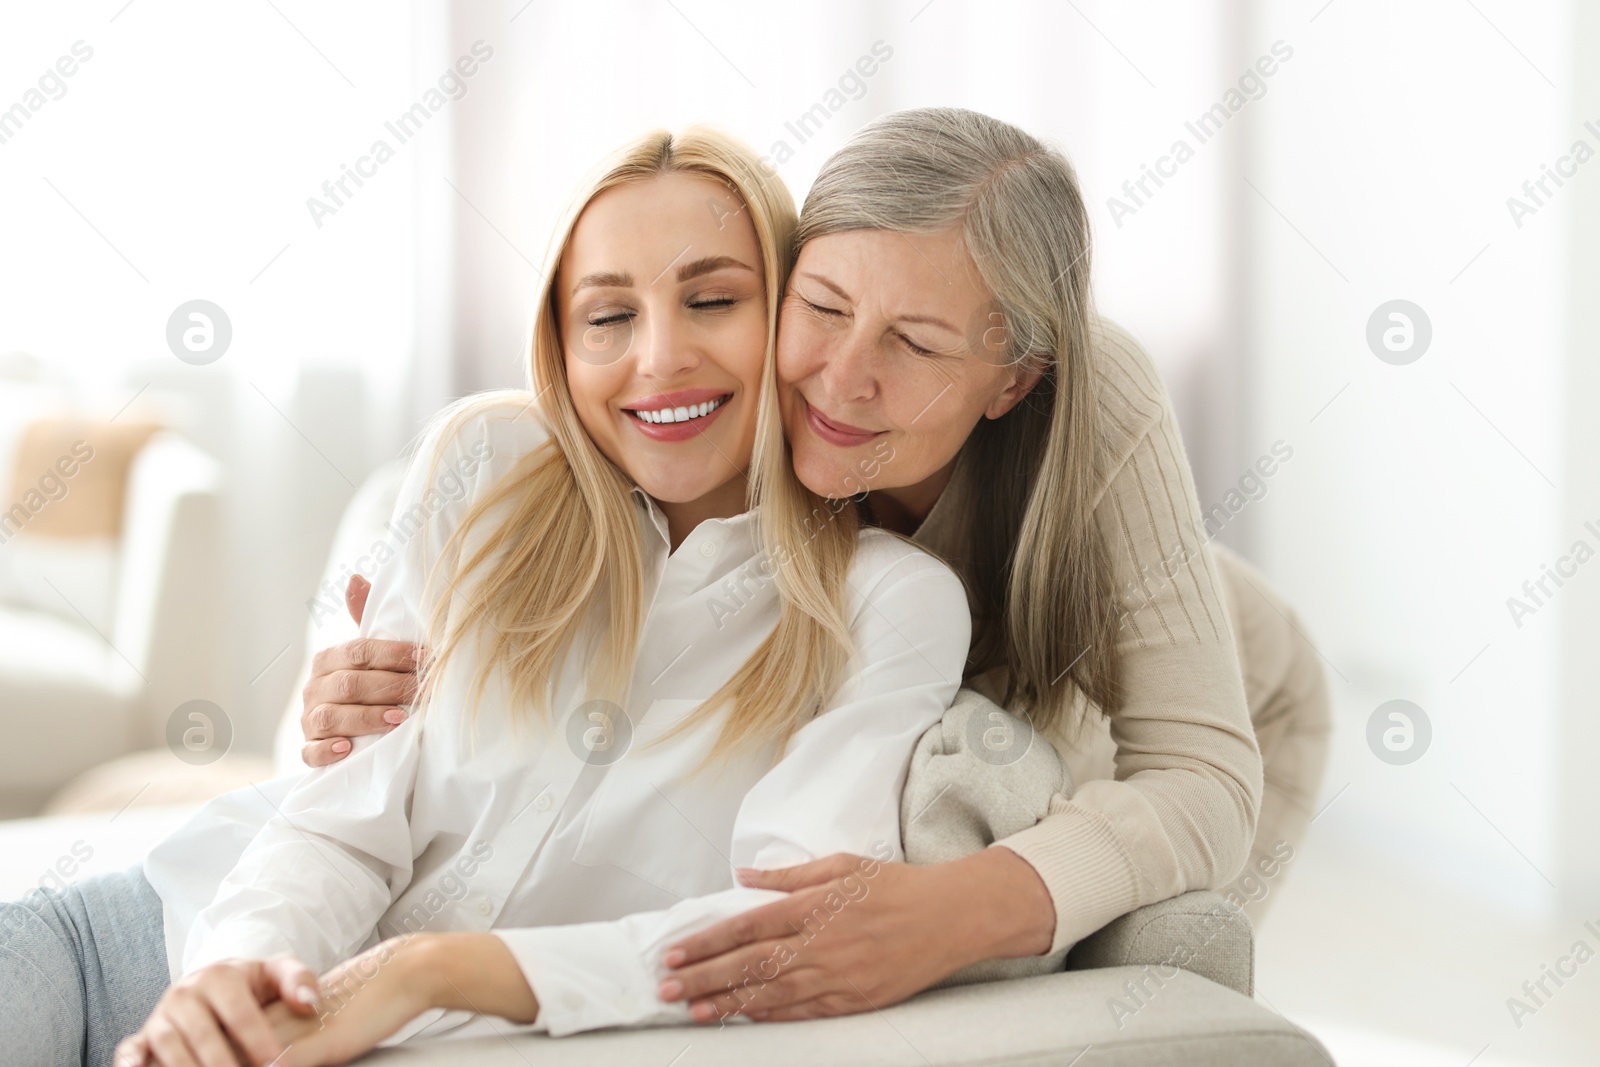 Photo of Family portrait of young woman and her mother at home